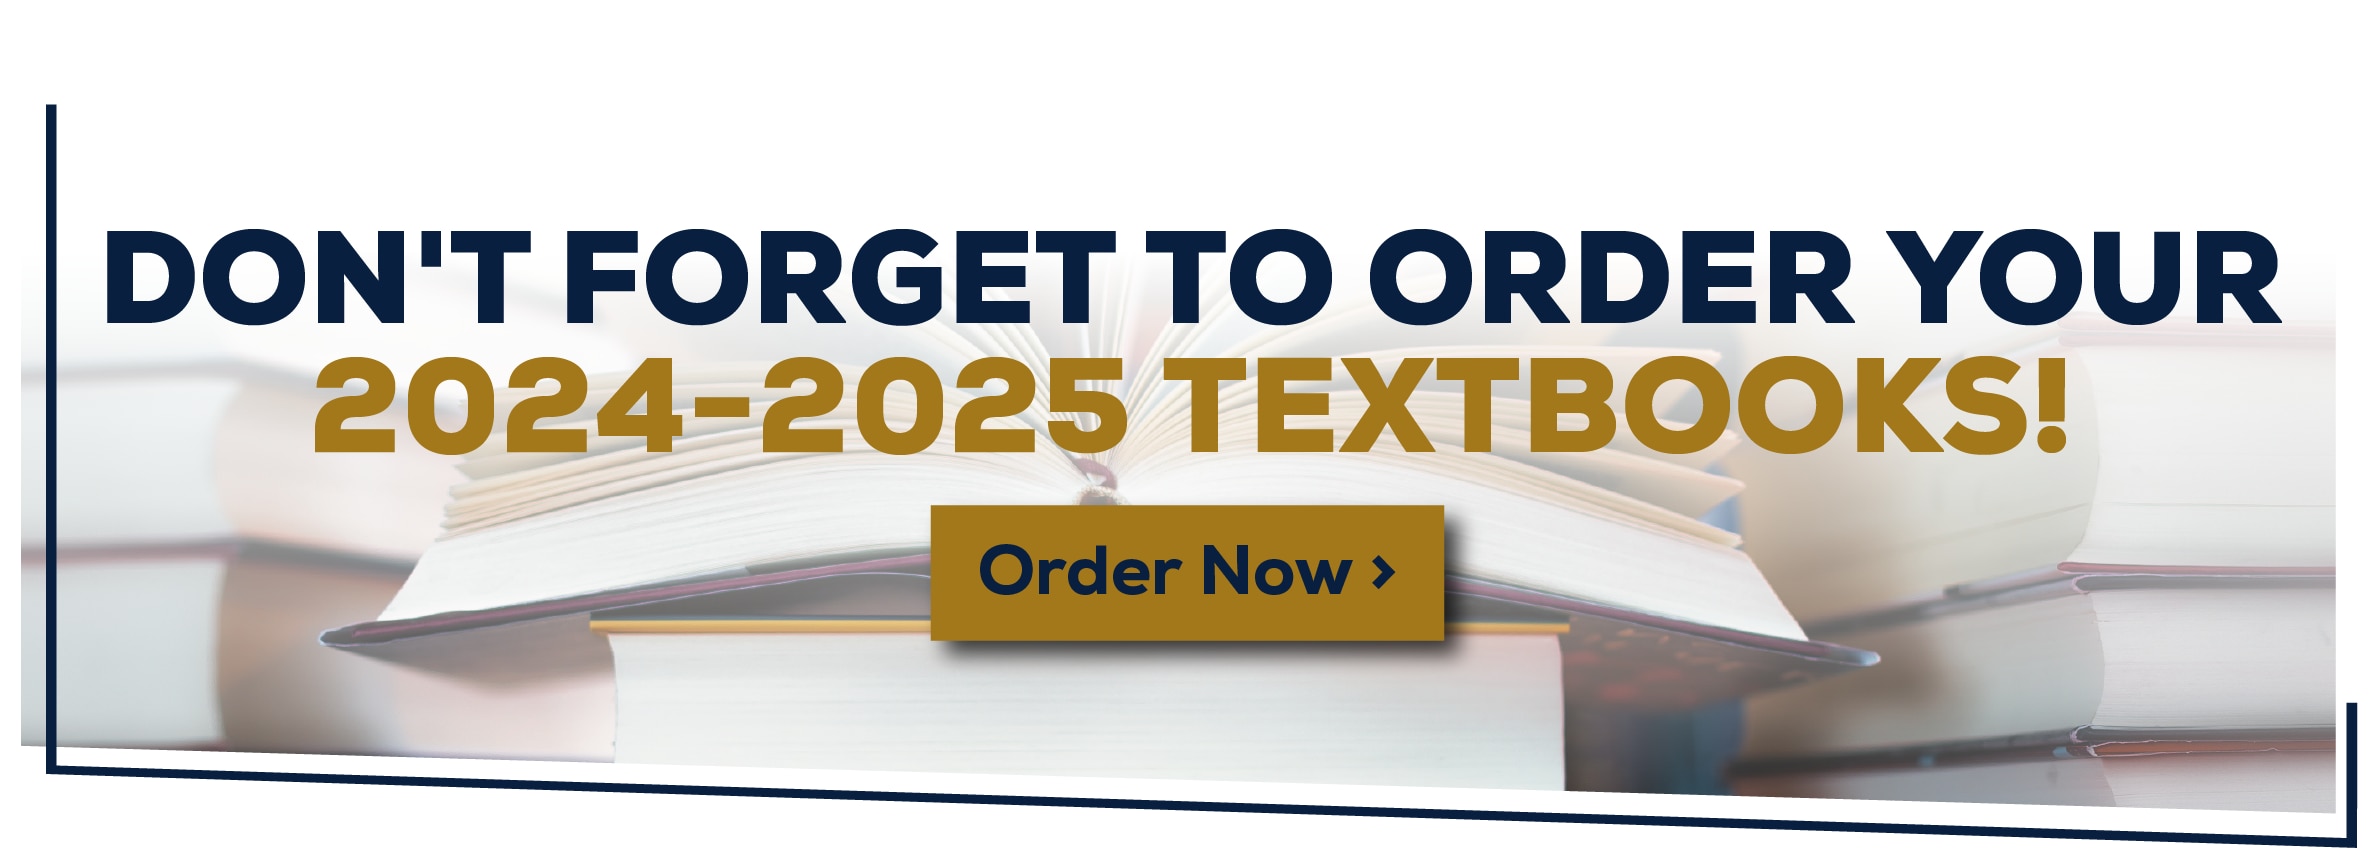 DON'T FORGET TO ORDER YOUR 2024-2025 TEXTBOOKS! Order Now >